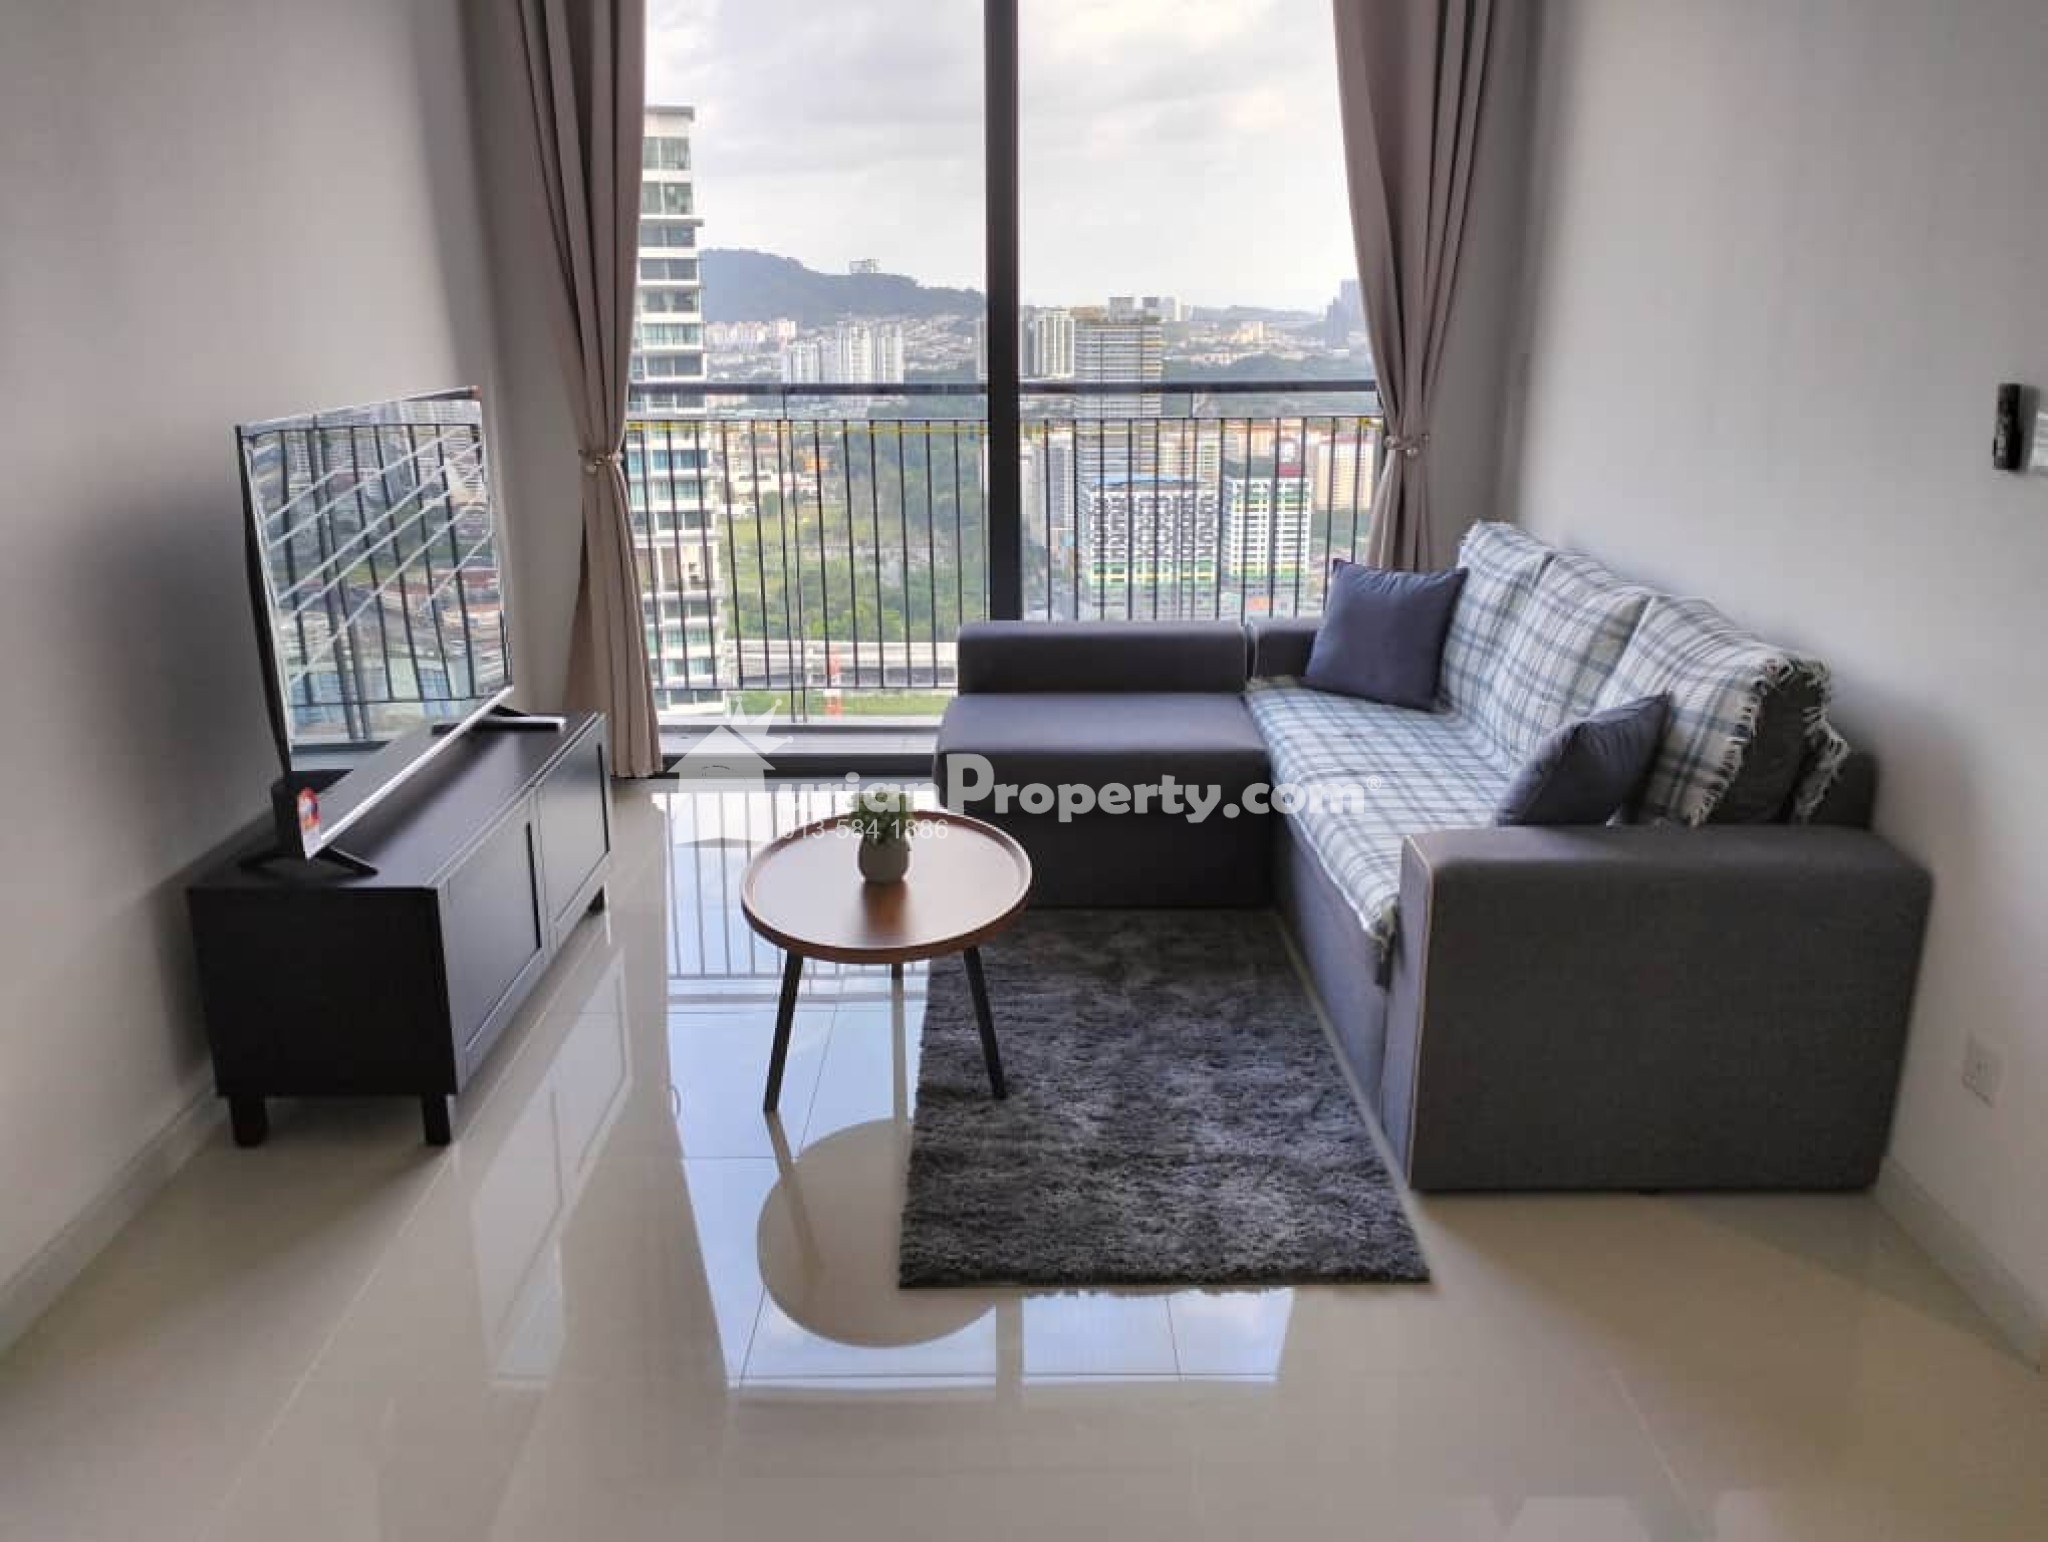 Condo For Rent at Sunway Velocity TWO